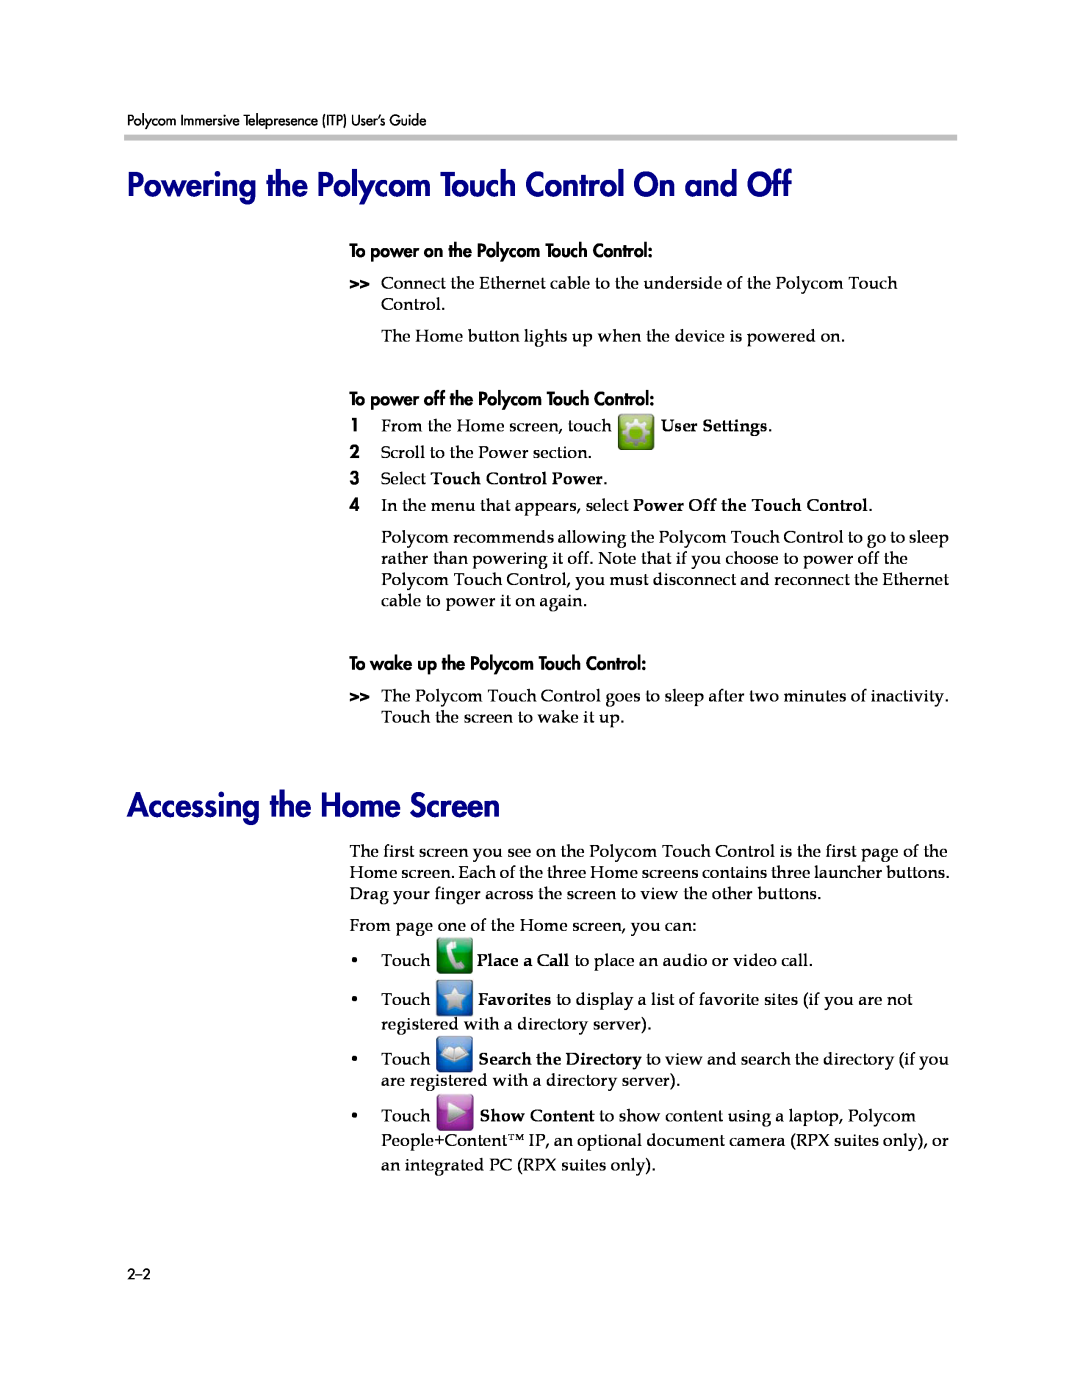 Polycom 3725-63211-002 manual Powering the Polycom Touch Control On and Off, Accessing the Home Screen, User Settings 